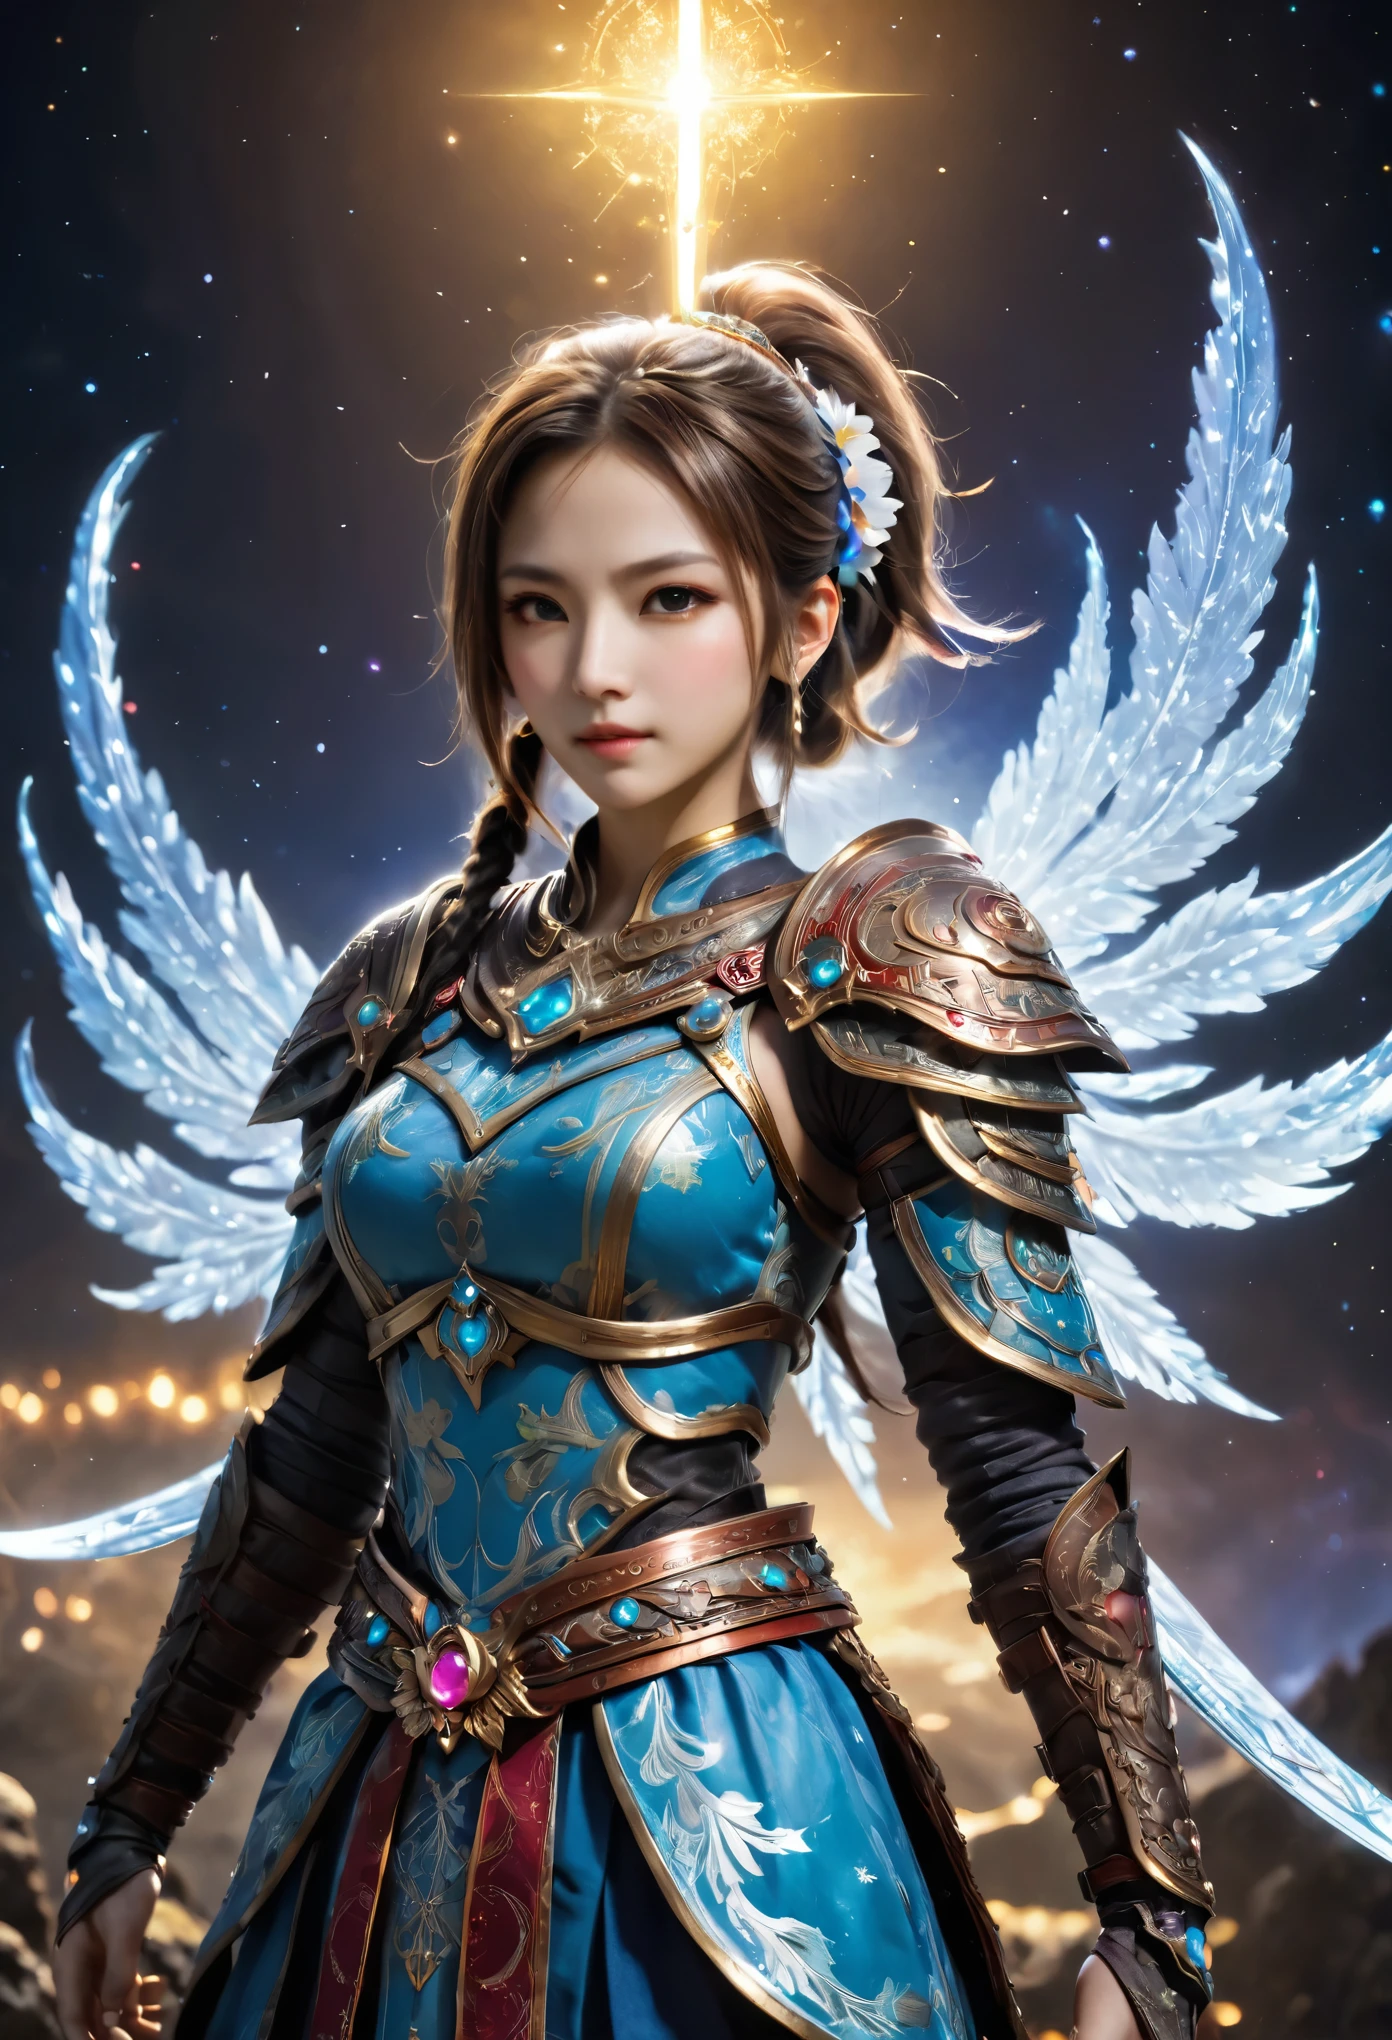 8K resolution, masterpiece, Highest quality, Award-winning works, unrealistic, final fantasy, Royal Jewel,Photorealistic Painting by Midjourney and Greg Rutkowski, , elegant, Very detailed, Delicate depiction of hair, miniature painting, Digital Painting, Art Station, Concept Art, Smooth, Sharp focus, shape, nature, Clear shadows, Full body portrait, Asura, God of War, Castle in the Sky, A strip of light pouring down from the sky, A pillar of light stretching to the sky, Complex colors, Buddhist Mandala, Colorful magic circle, flash, Mysterious Background, Aura, Qinglong, A gentle gaze, BREAK, Small faint lights and flying fireflies, night, Starry Sky, milky way, nebula, shooting star, Flowers, birds, wind and moon,erotic, sole sexy lady, healthy shaped body, Anatomically accurate skeleton, 22 years old lady, Asura, 170cm tall, huge firm bouncing busts, Holy sword in both hands, Complicated armor, Brightly colored armor, battlefield, fight, dash,